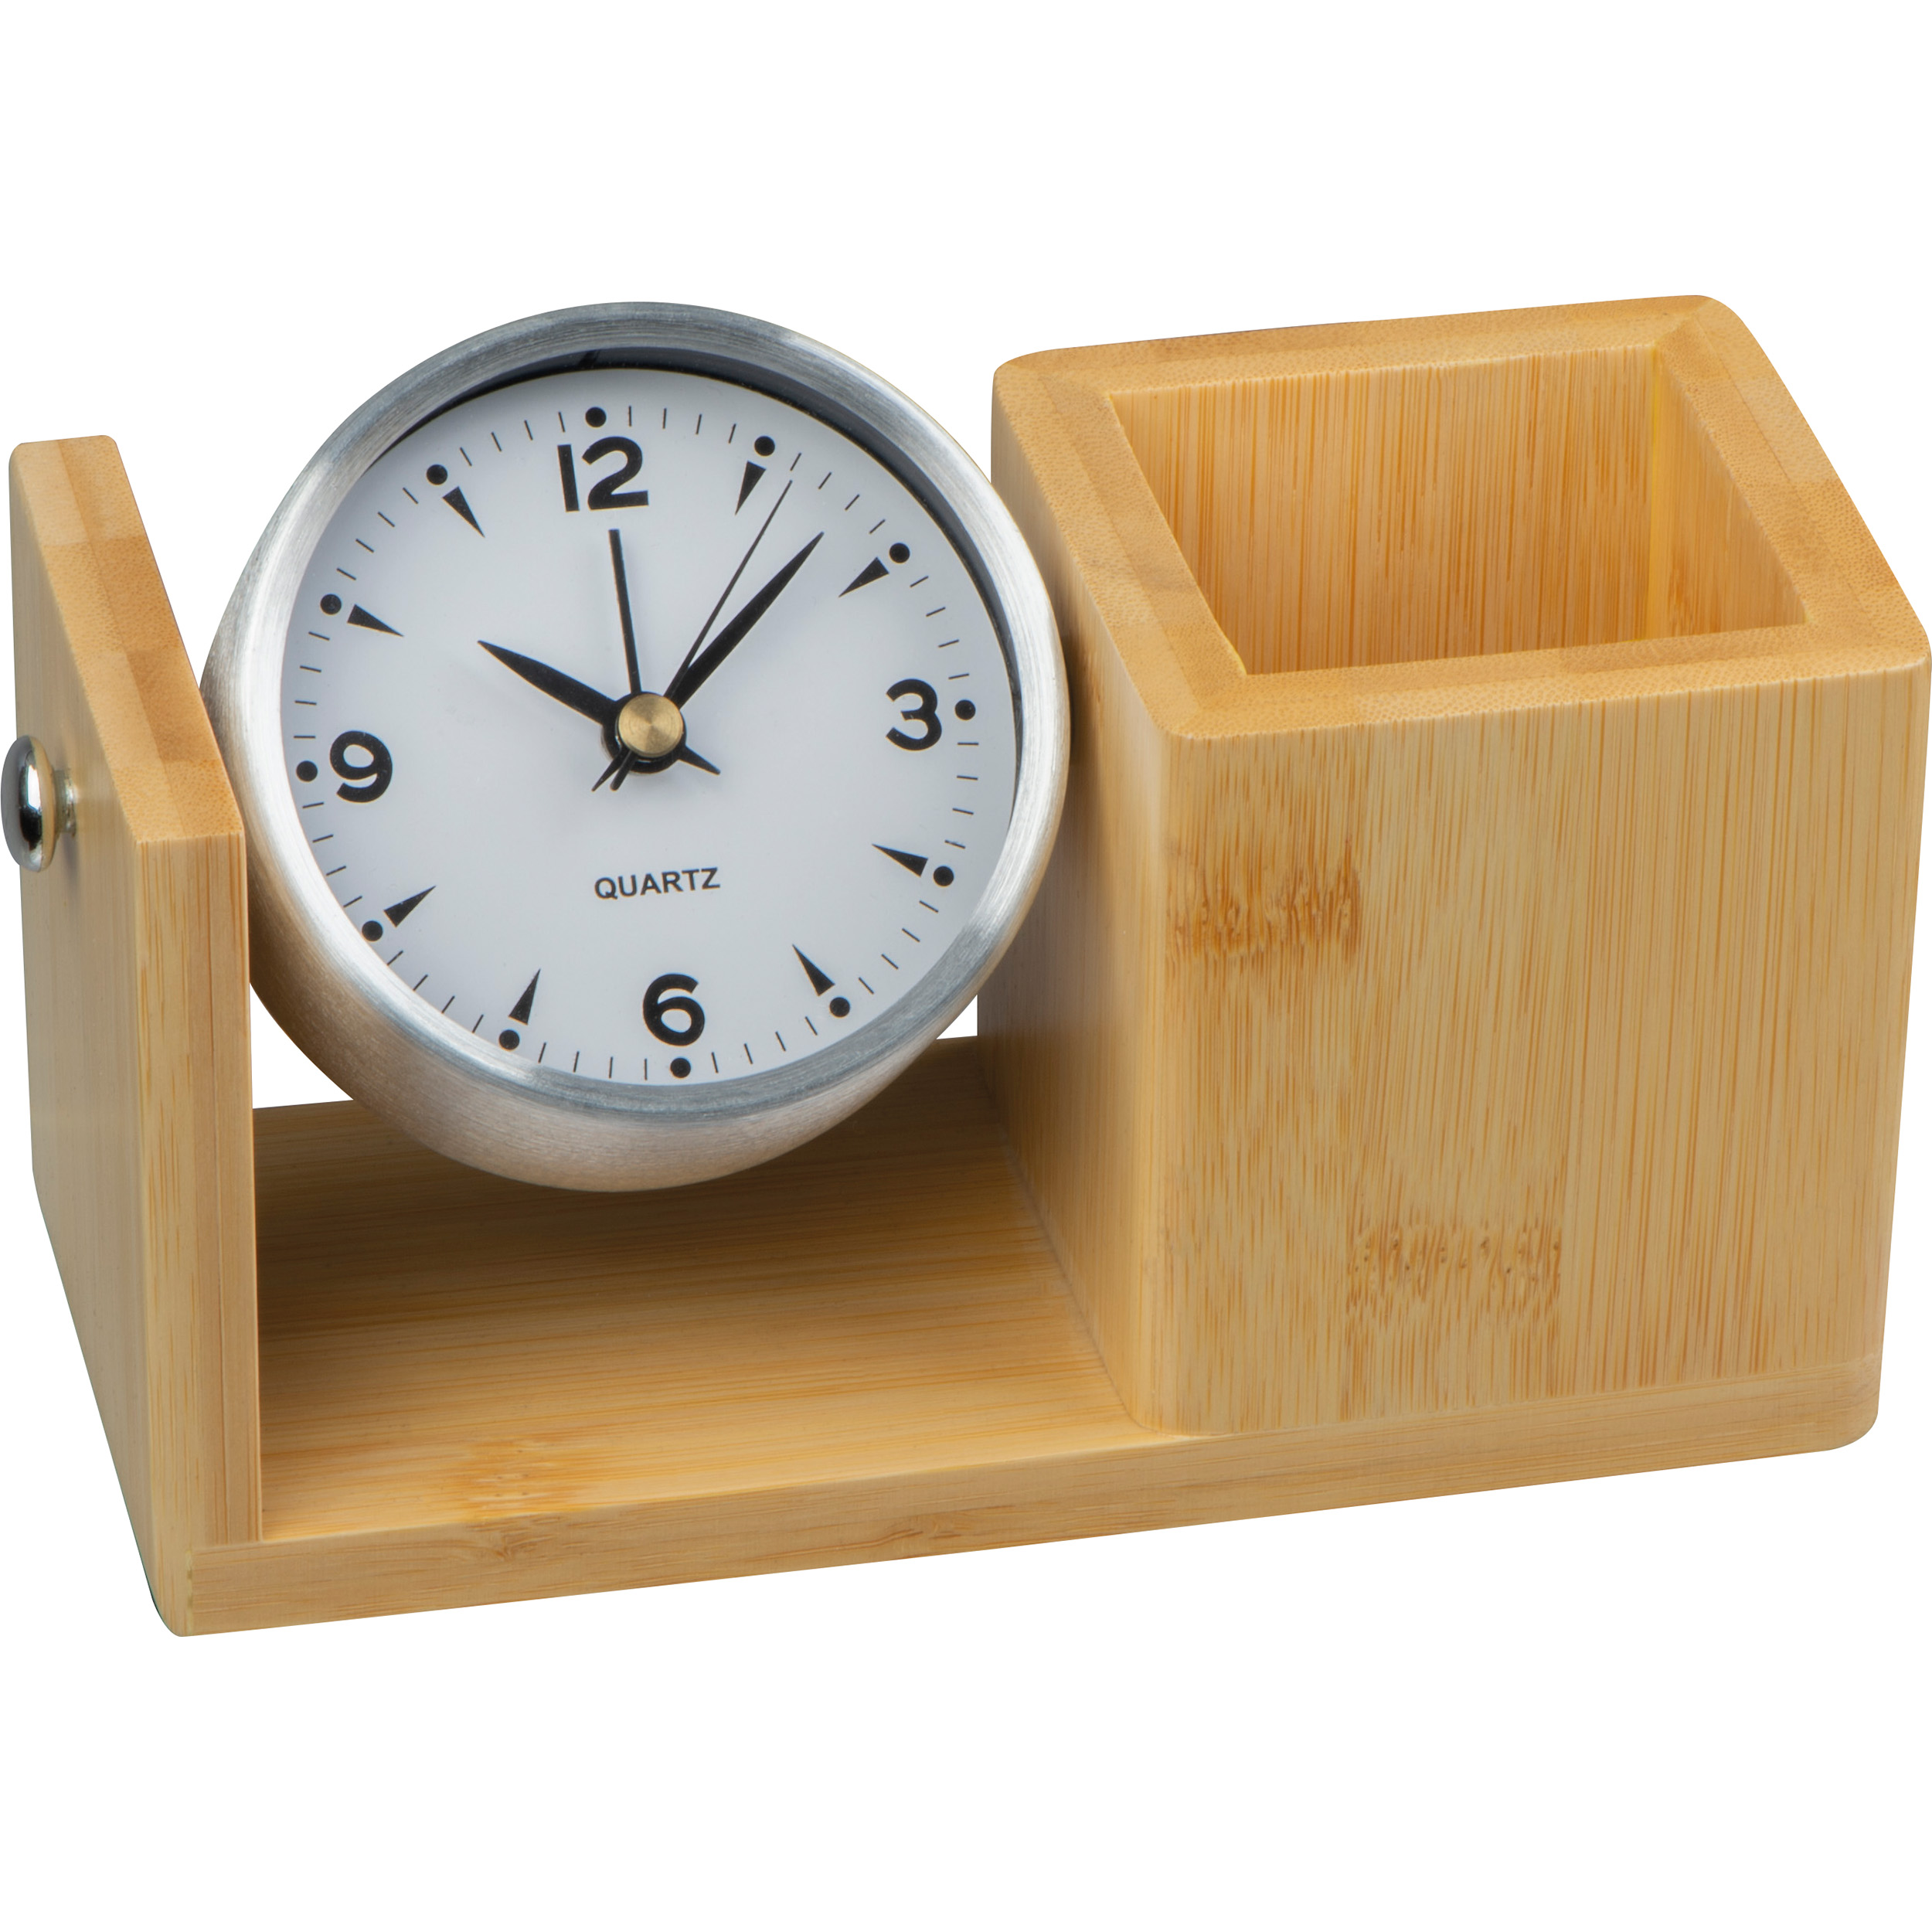 bamboo pencil case with analogue clock